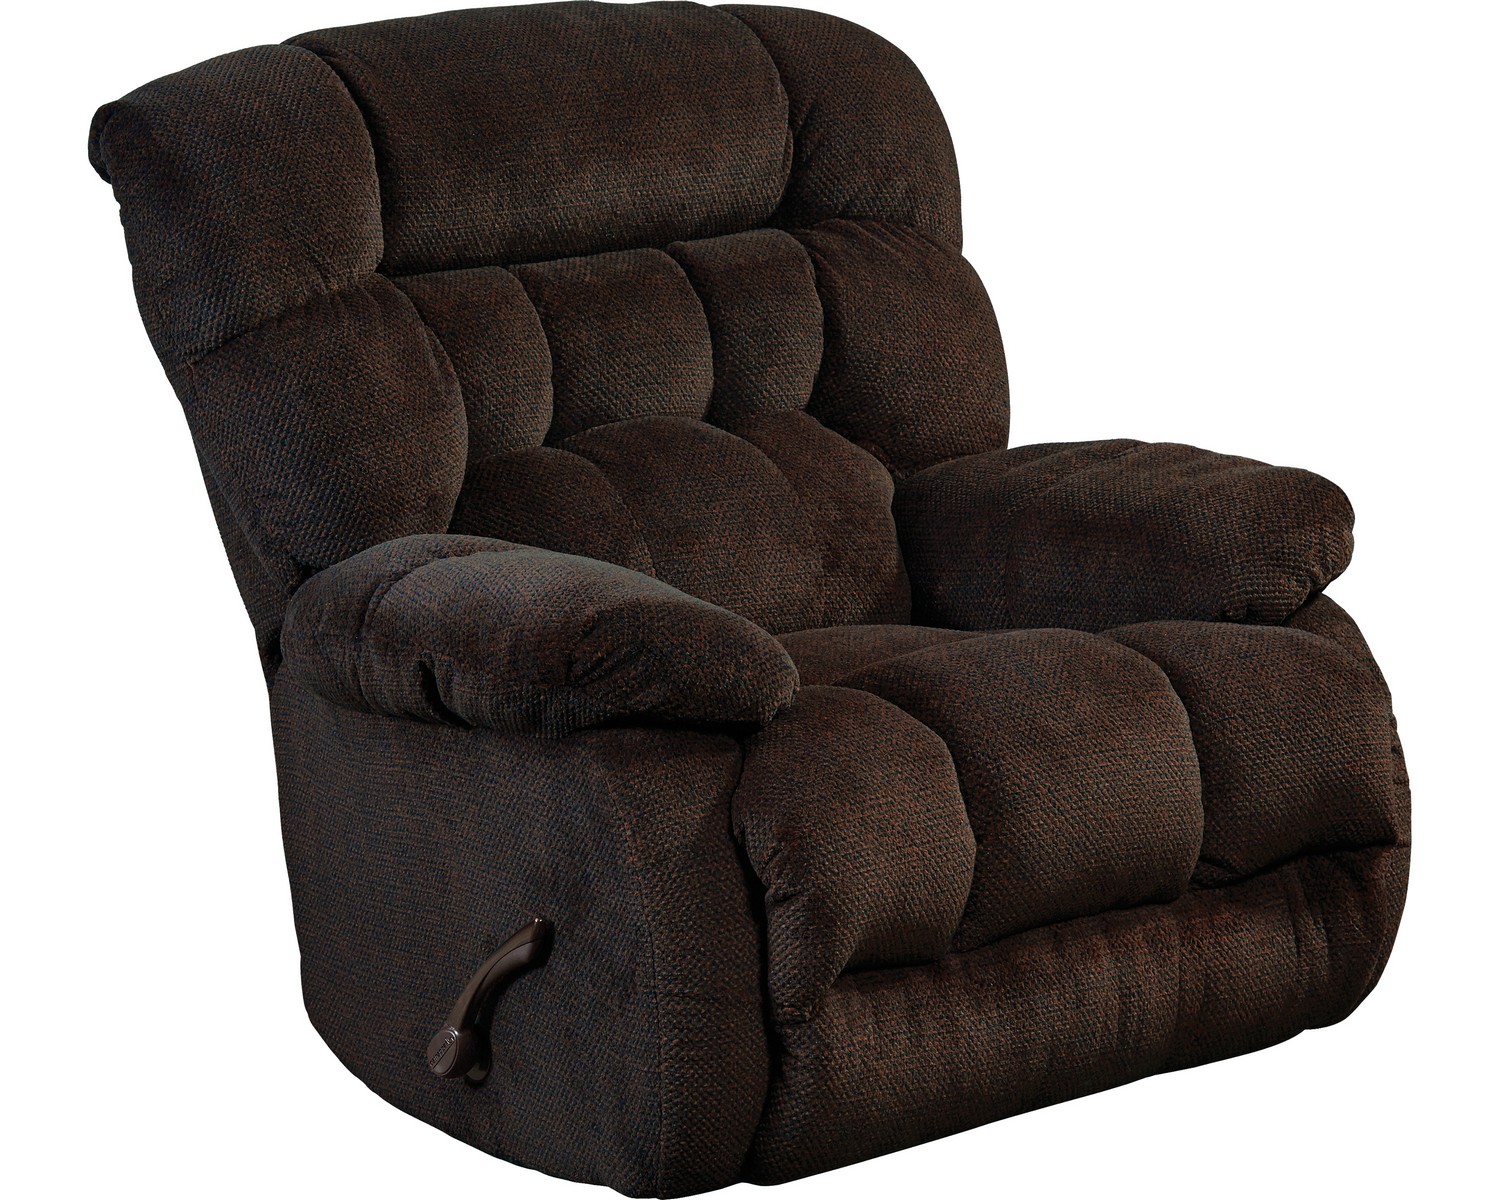 CatNapper Daly Power Lay Flat Recliner - Chocolate